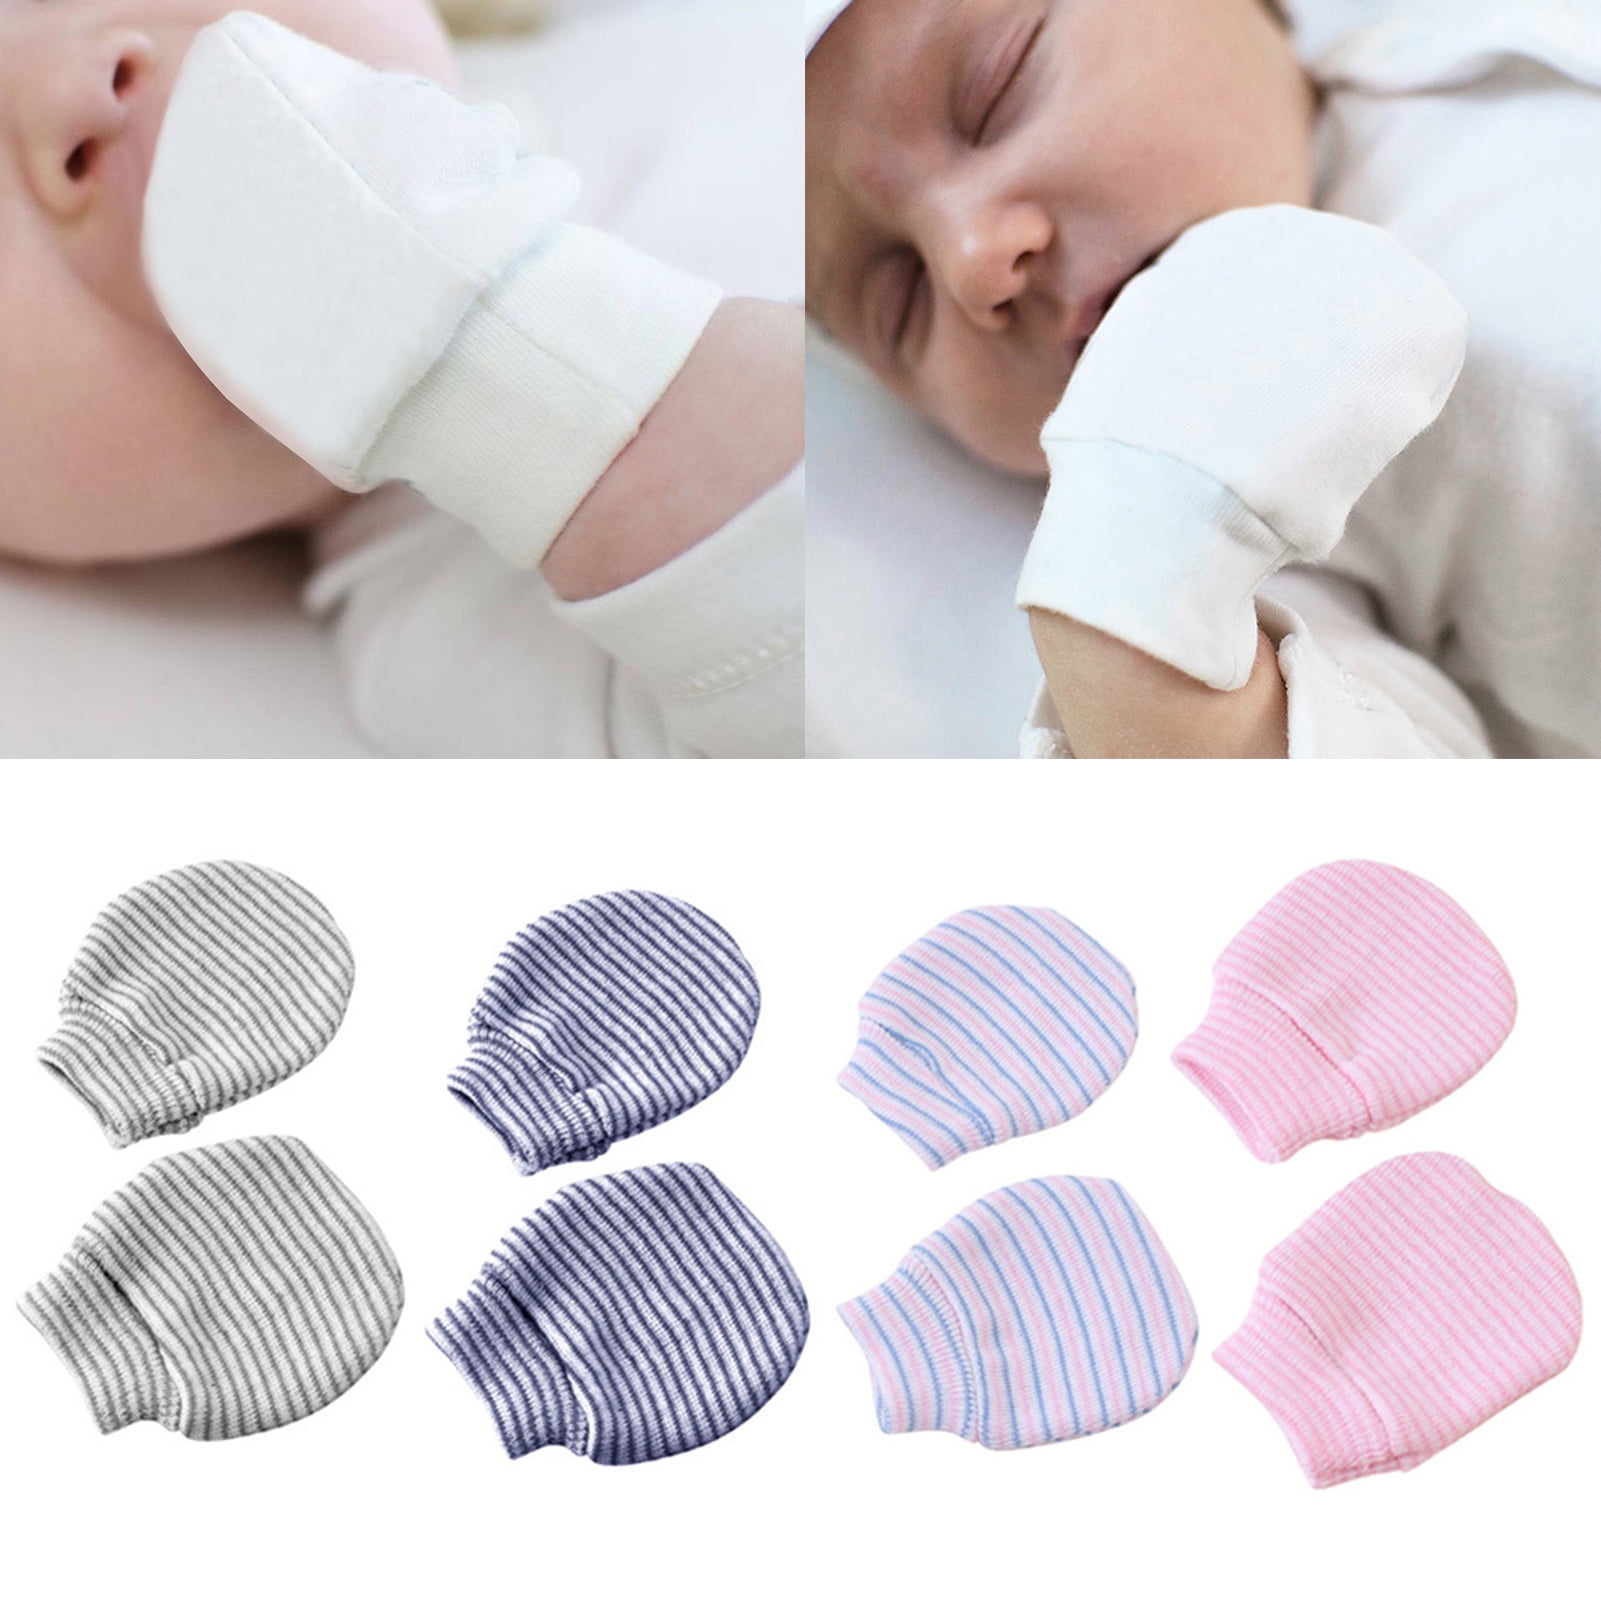 6 Pair, 0-1 Yars Old HEALIFTY Baby Anti-scratch Cotton Gloves Soft Breathable Comfrotable Mesh Gloves Hands Protector for Infant Newborn